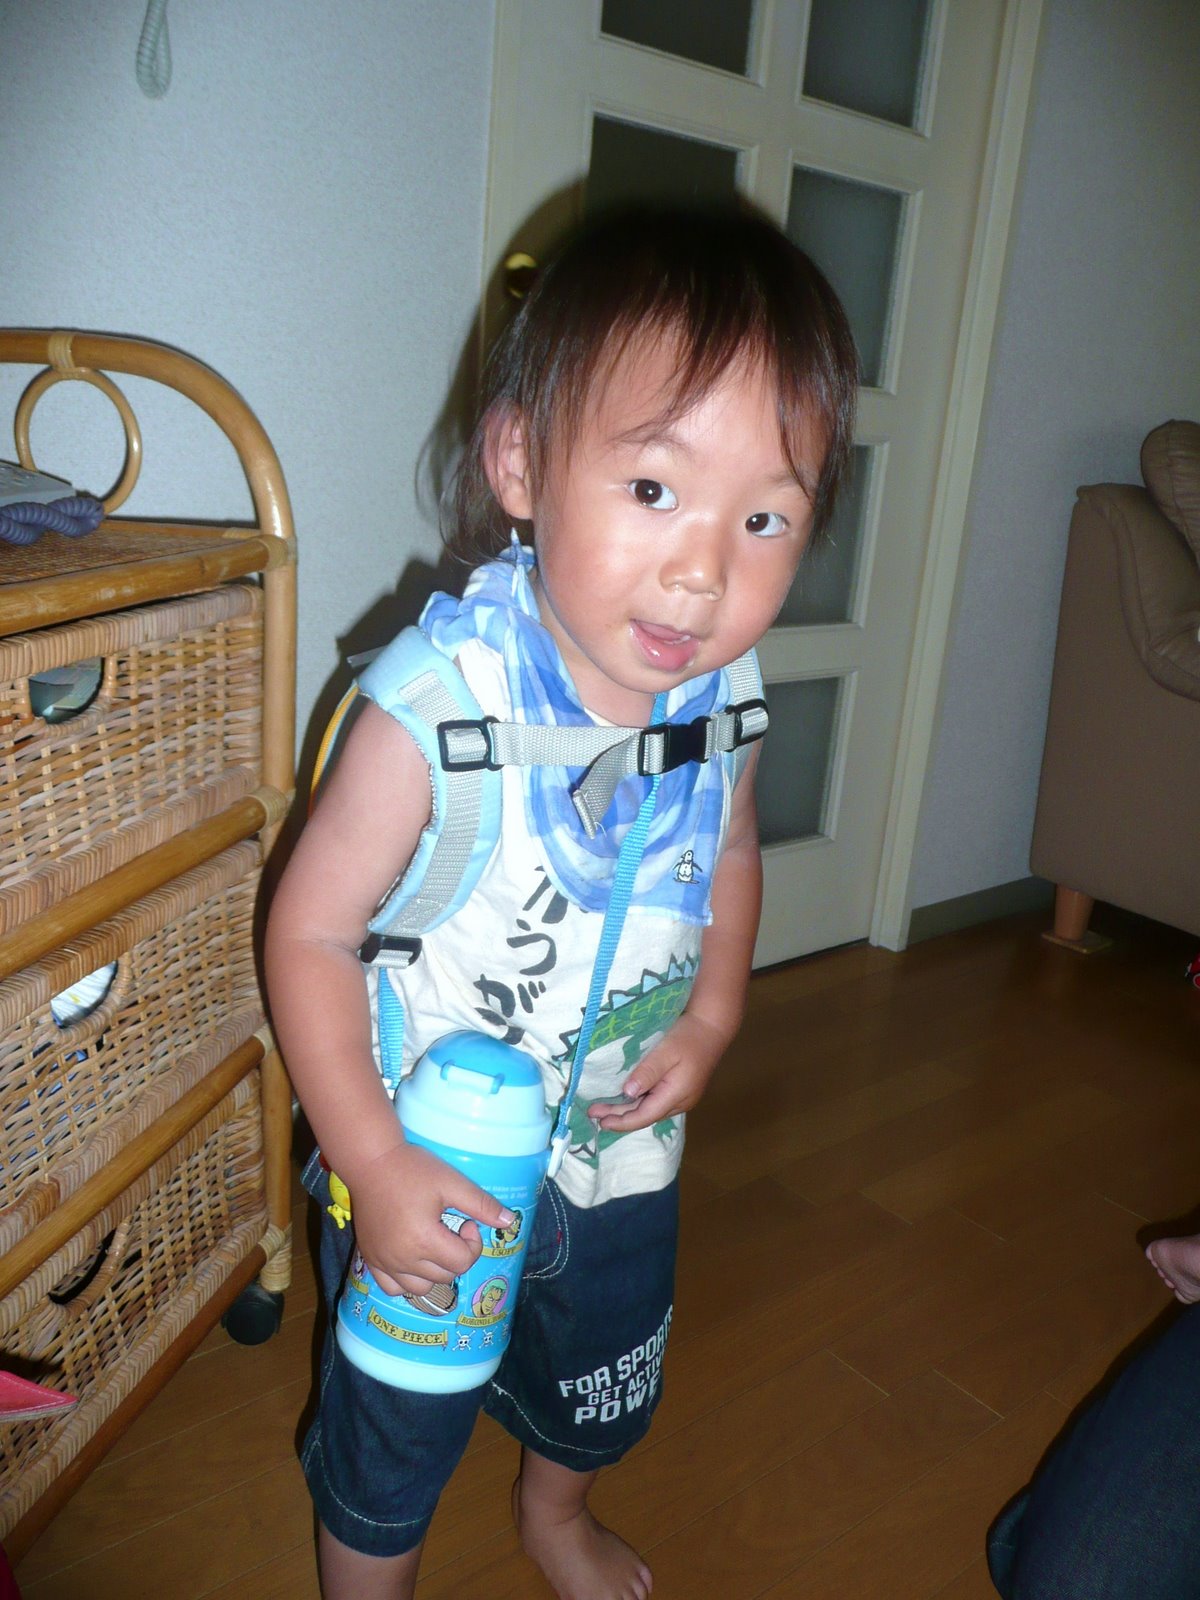 [Jidai+with+backpack+and+water+bottle+July+8,+2008.JPG]